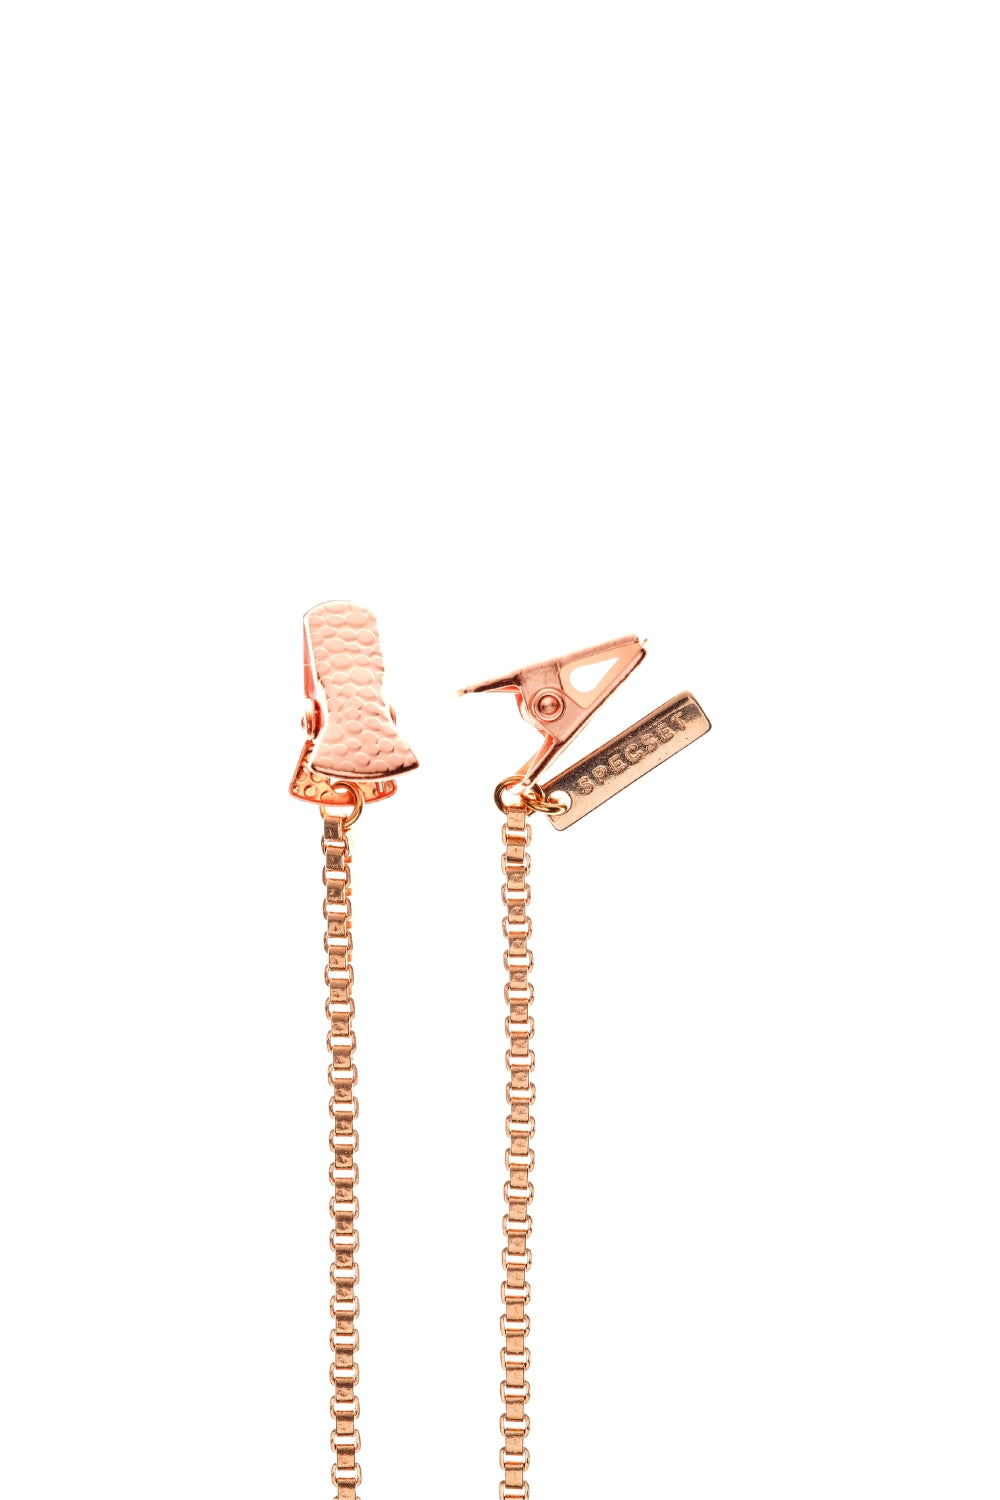 BOX IT - Unisex Eyewear and AirPods Chain - Rose Gold | SPECSET